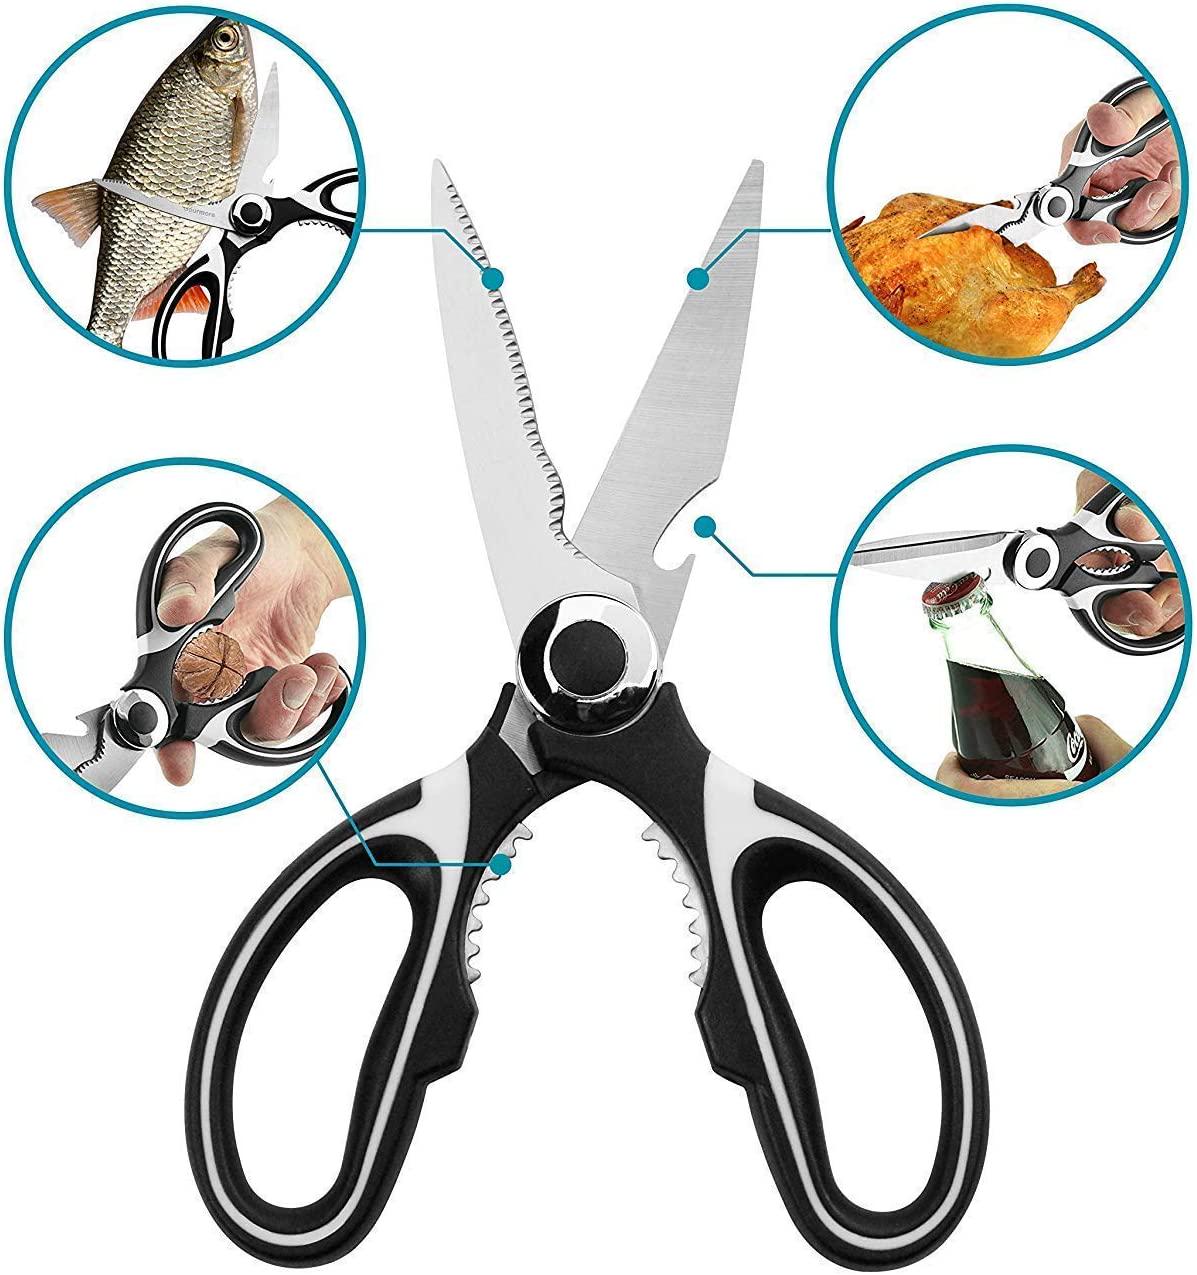 AiScrofa, Kitchen Shears,Multifunctional Heavy Duty Kitchen Scissors - Ultra Sharp Stainless Steel Shears for Chicken, Poultry, Meat,Fish, Vegetables and BBQ(Black and White)